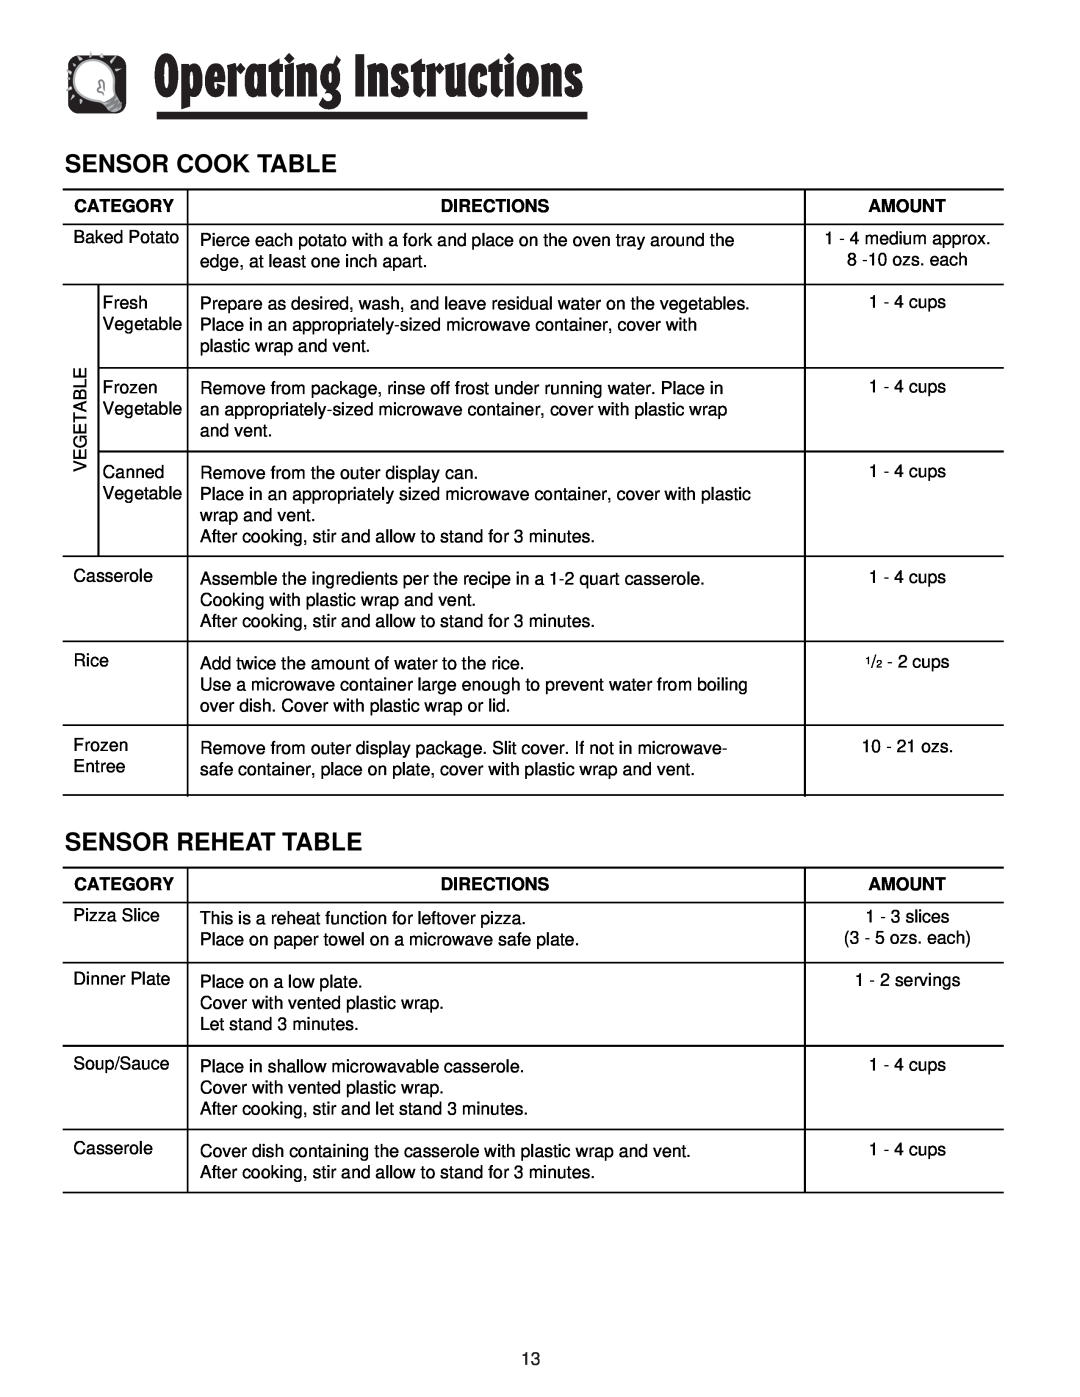 Maytag JMV8208AA/AC Sensor Cook Table, Sensor Reheat Table, Operating Instructions, Category, Directions, Amount 